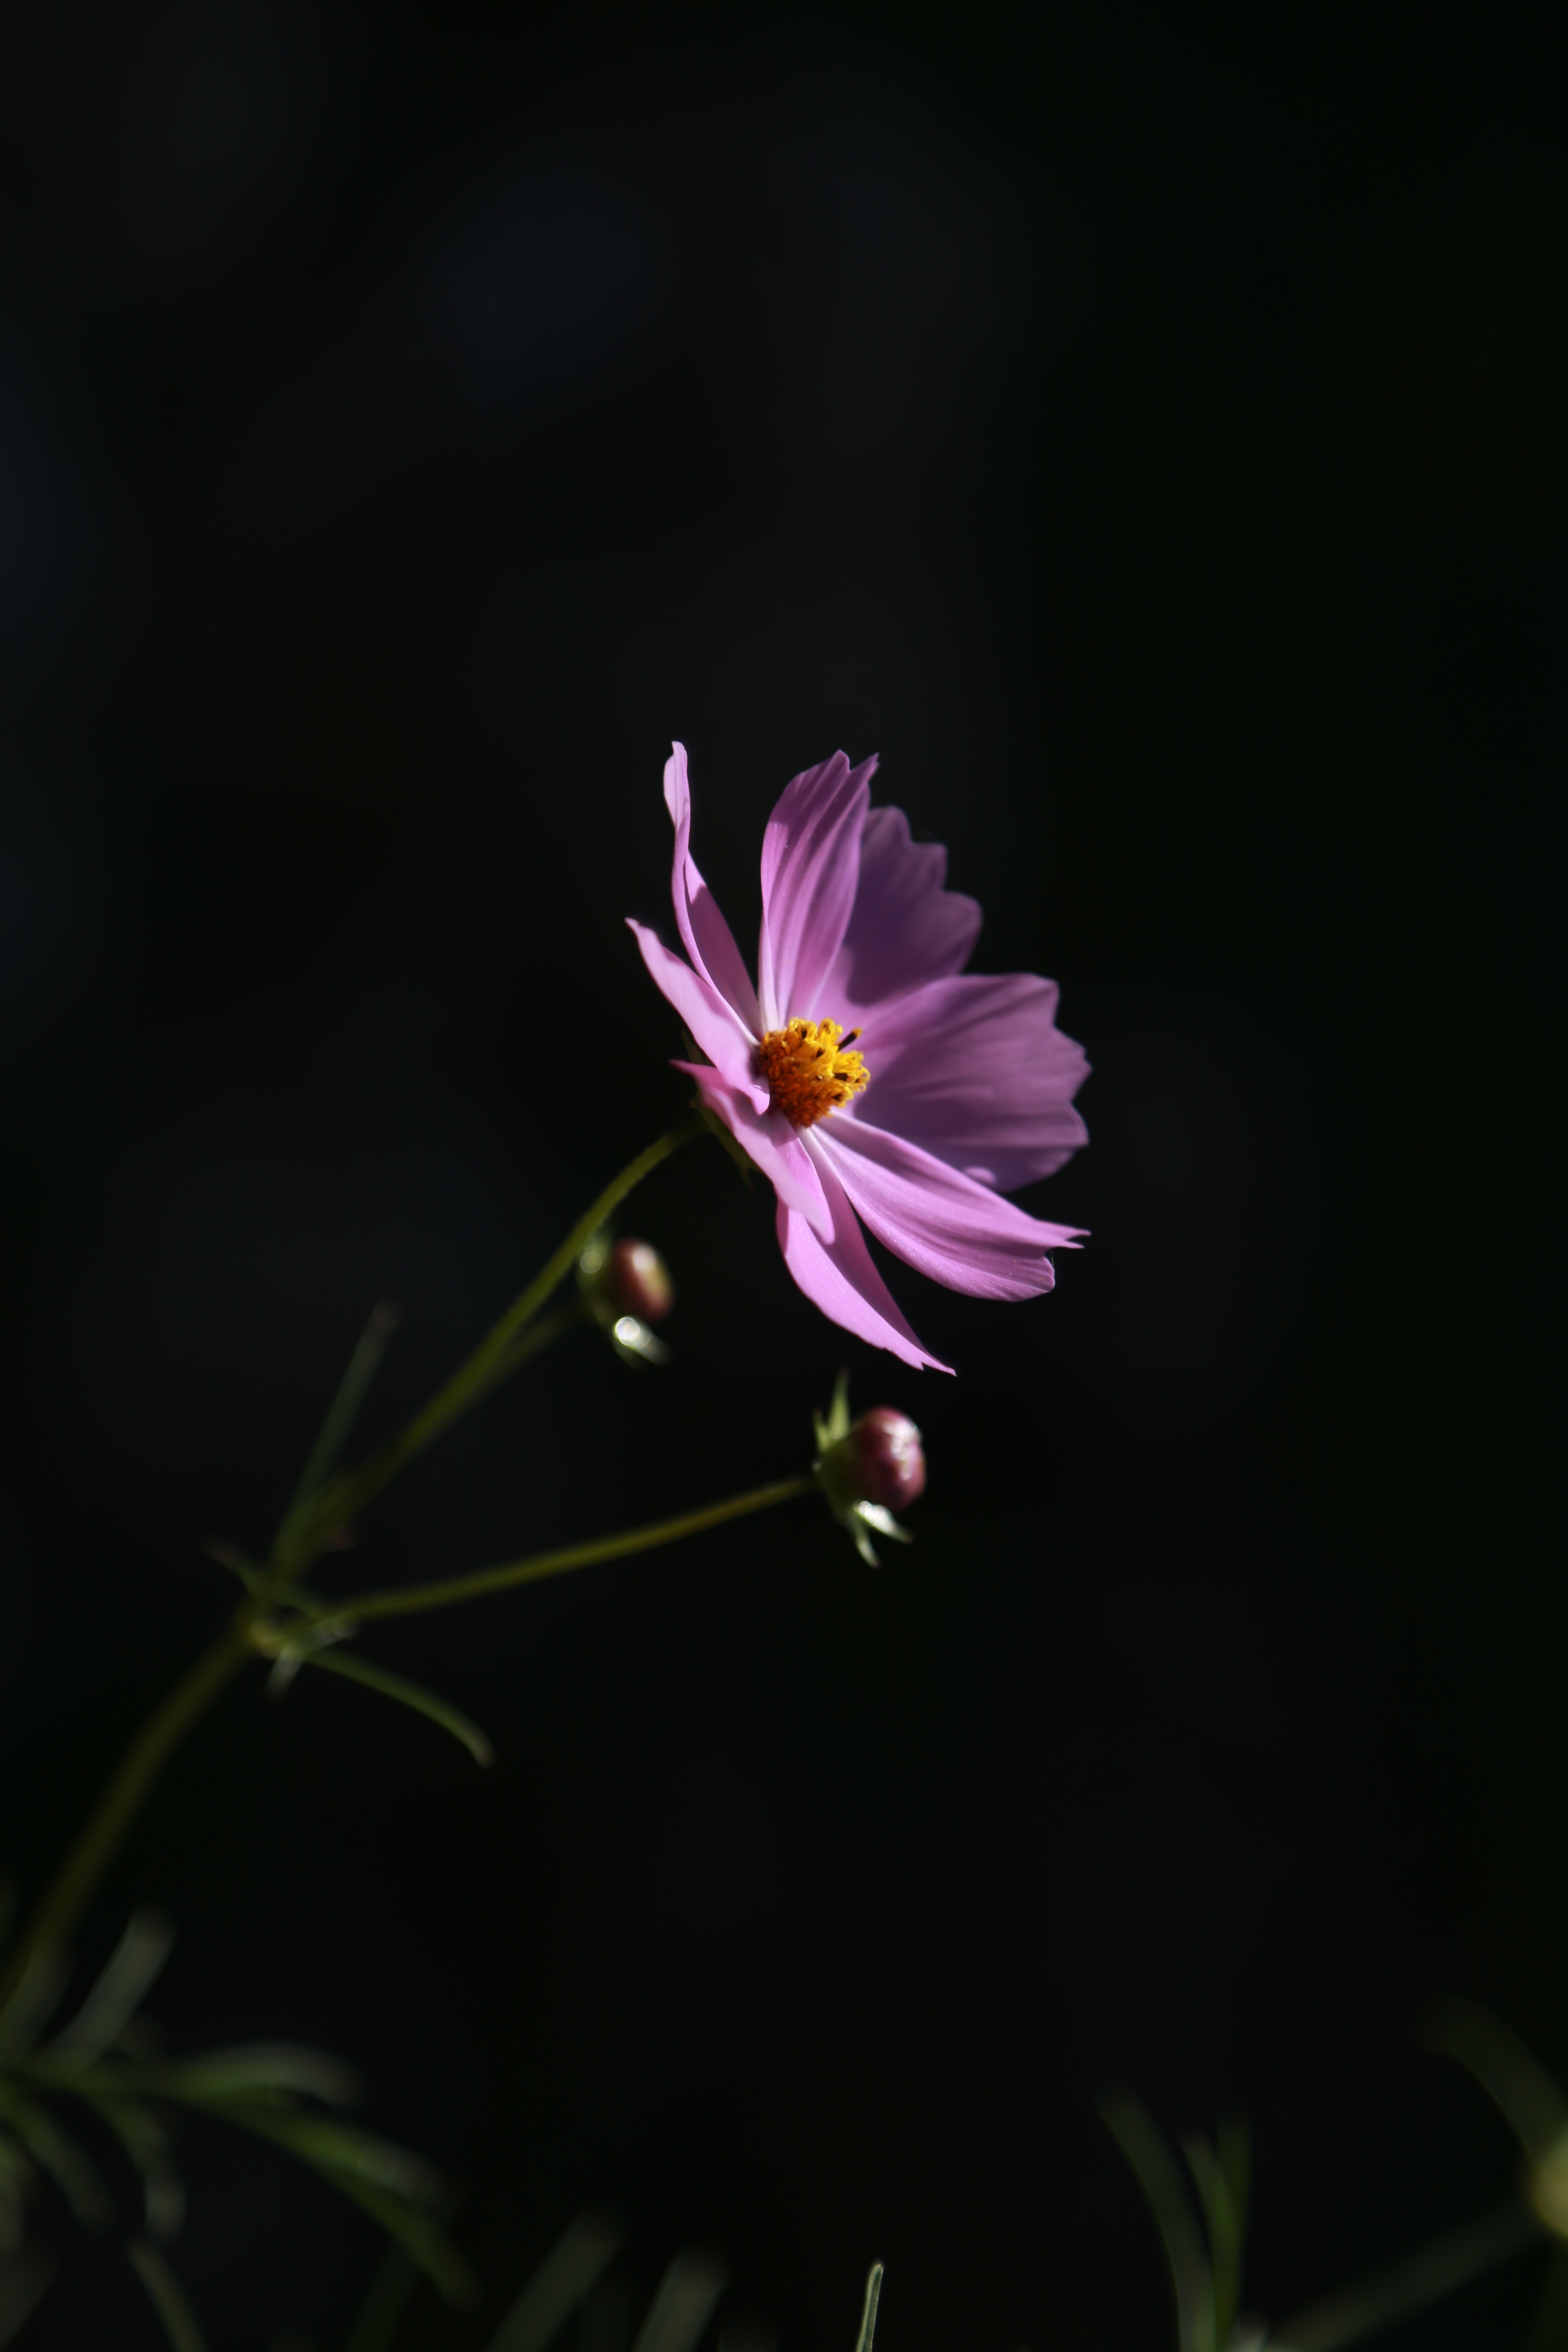 dark background, flowers, lilac, flower, blooms, kosmeya, cosmos for android